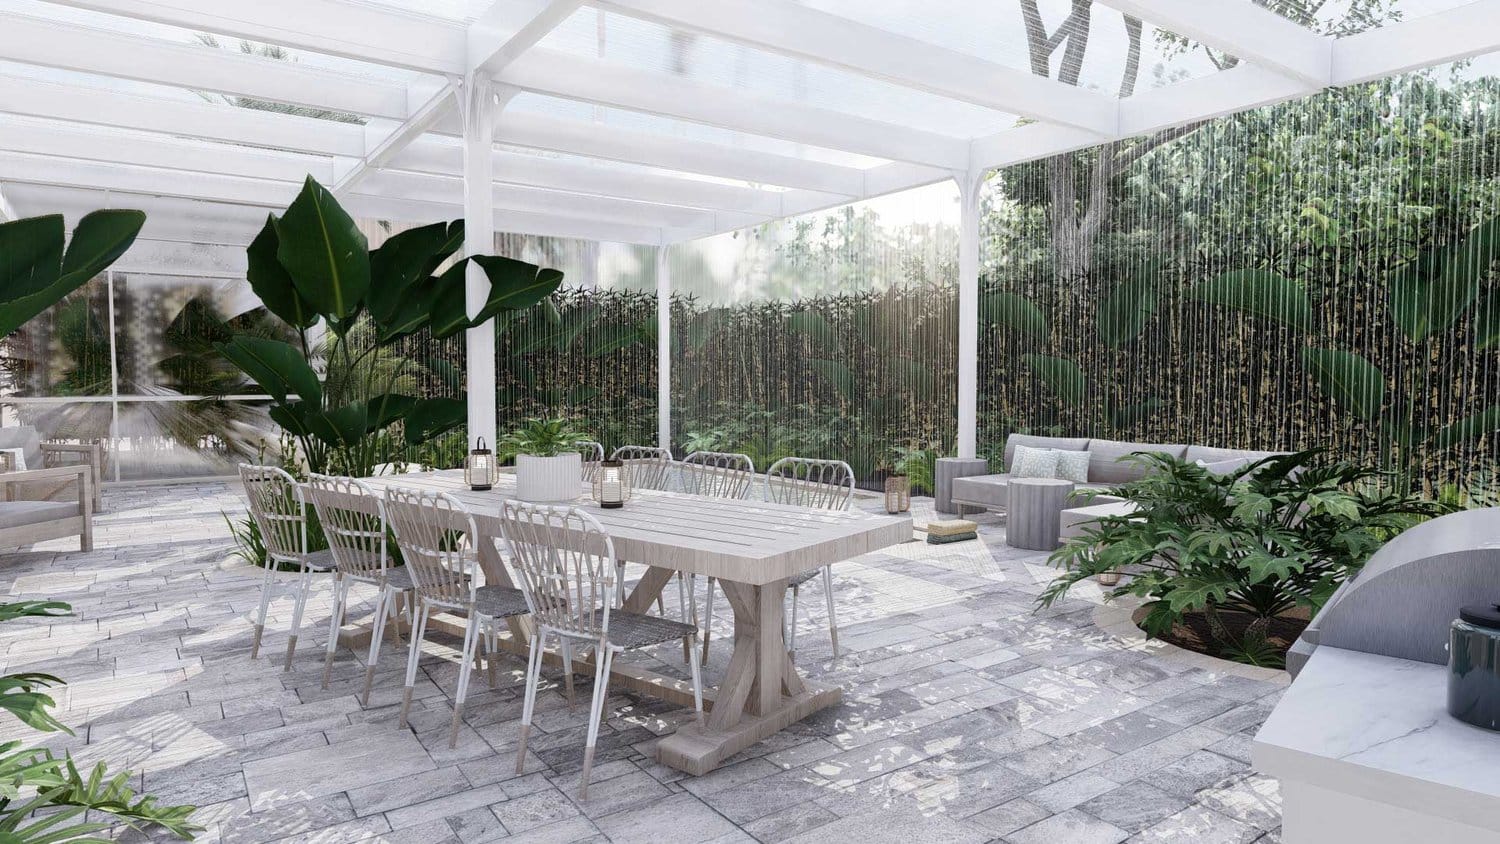 Miami yard with dining area, pergola and green wall